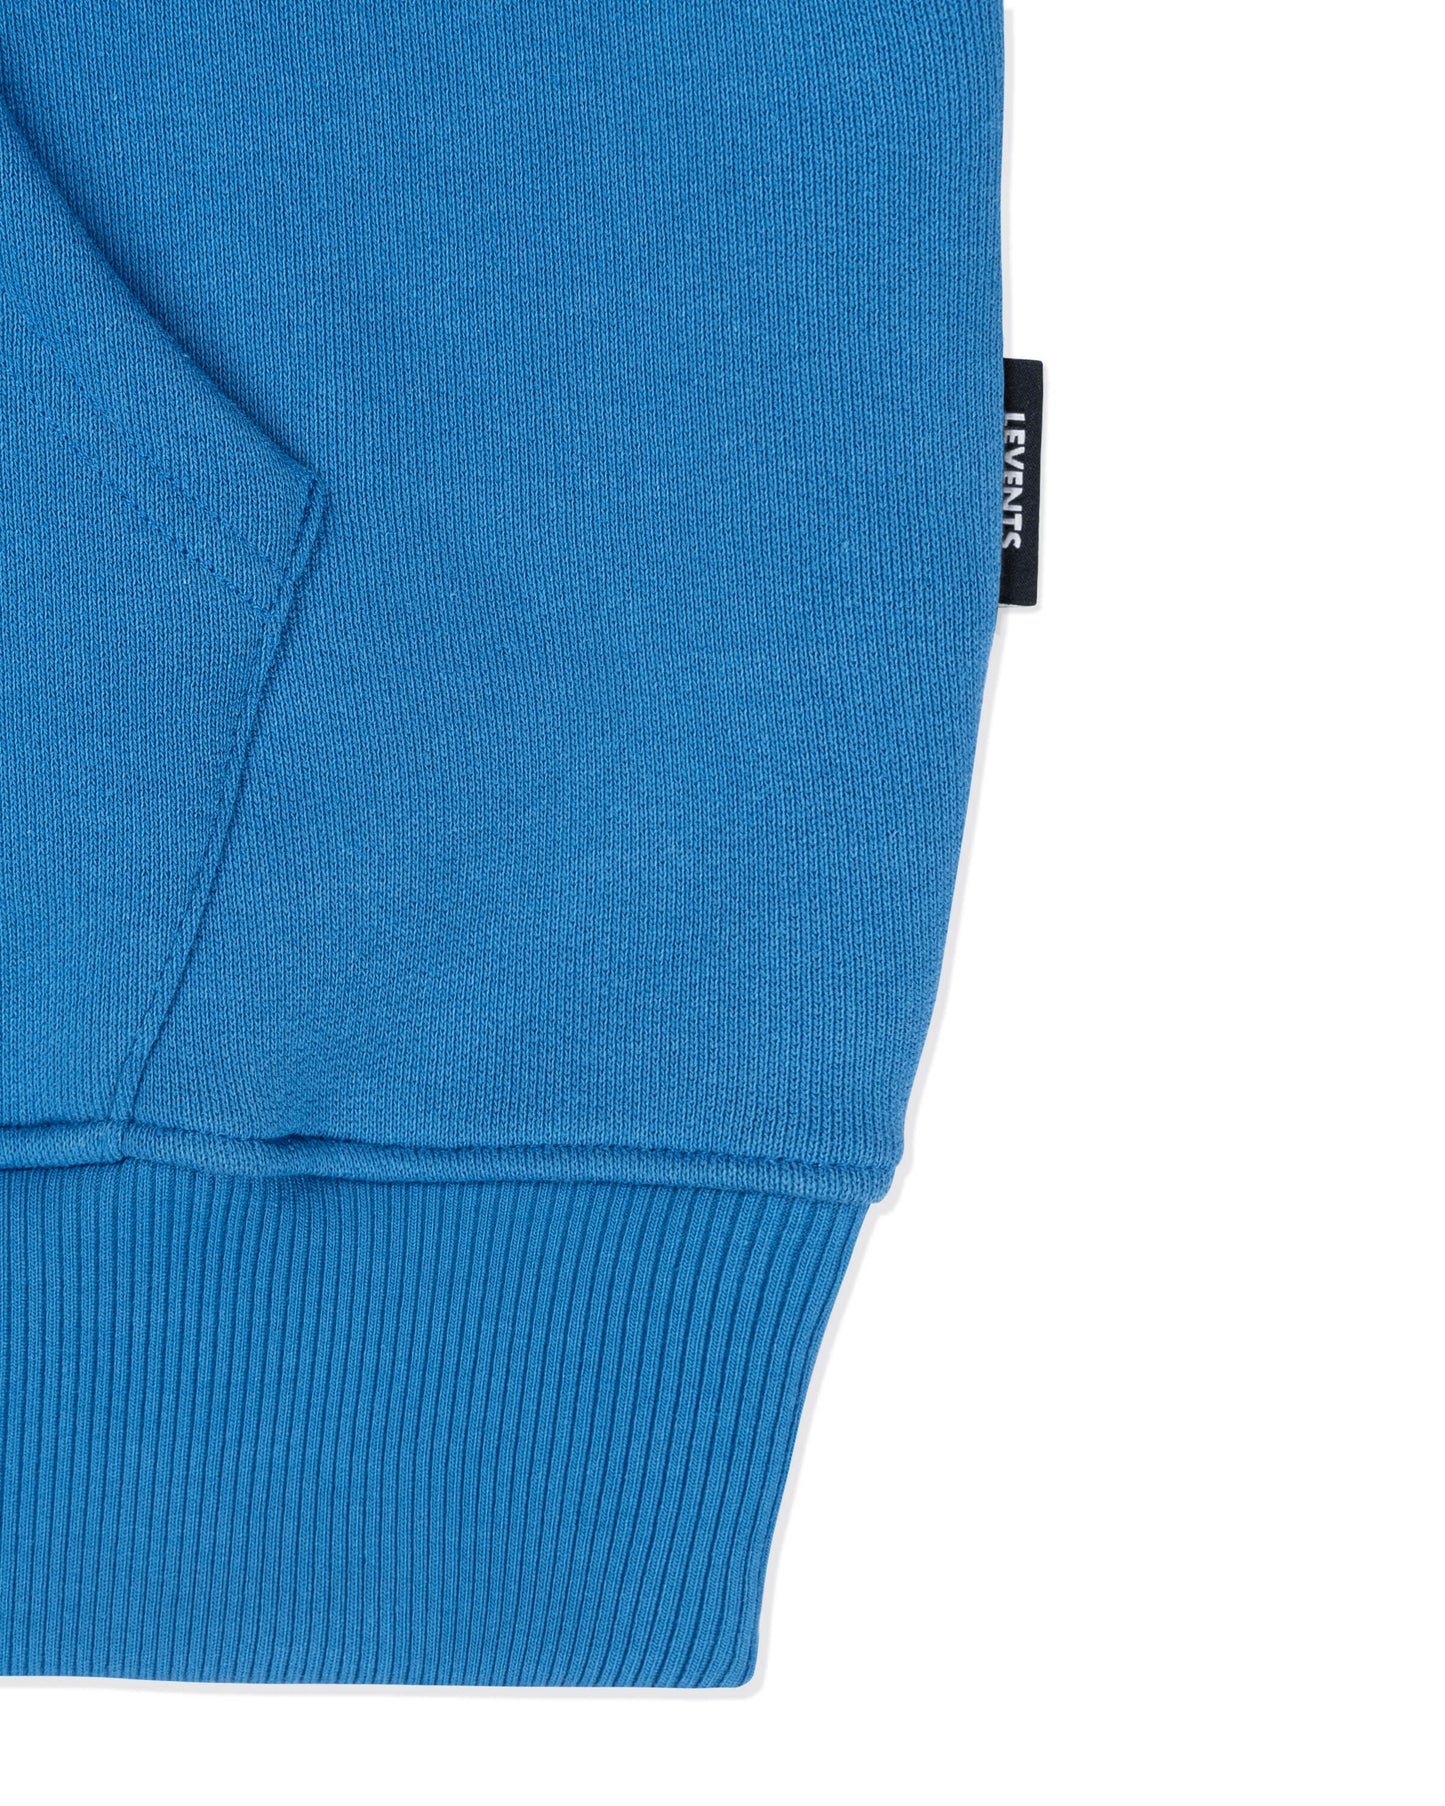 Levents® College Vibe Boxy 2.0 Hoodie/ Blue